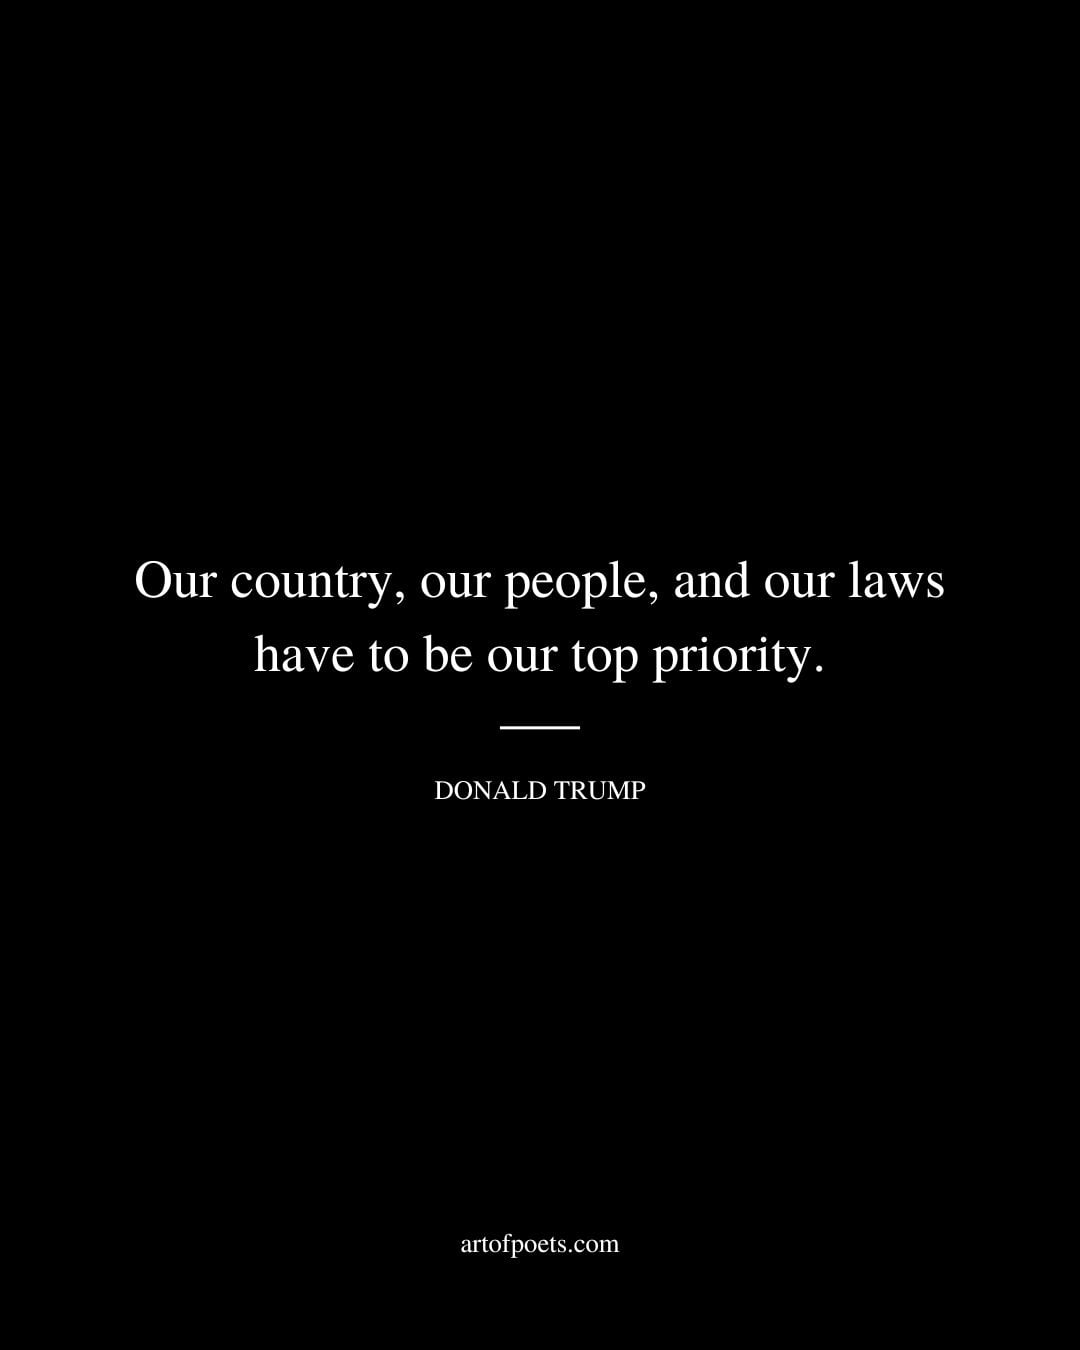 Our country our people and our laws have to be our top priority